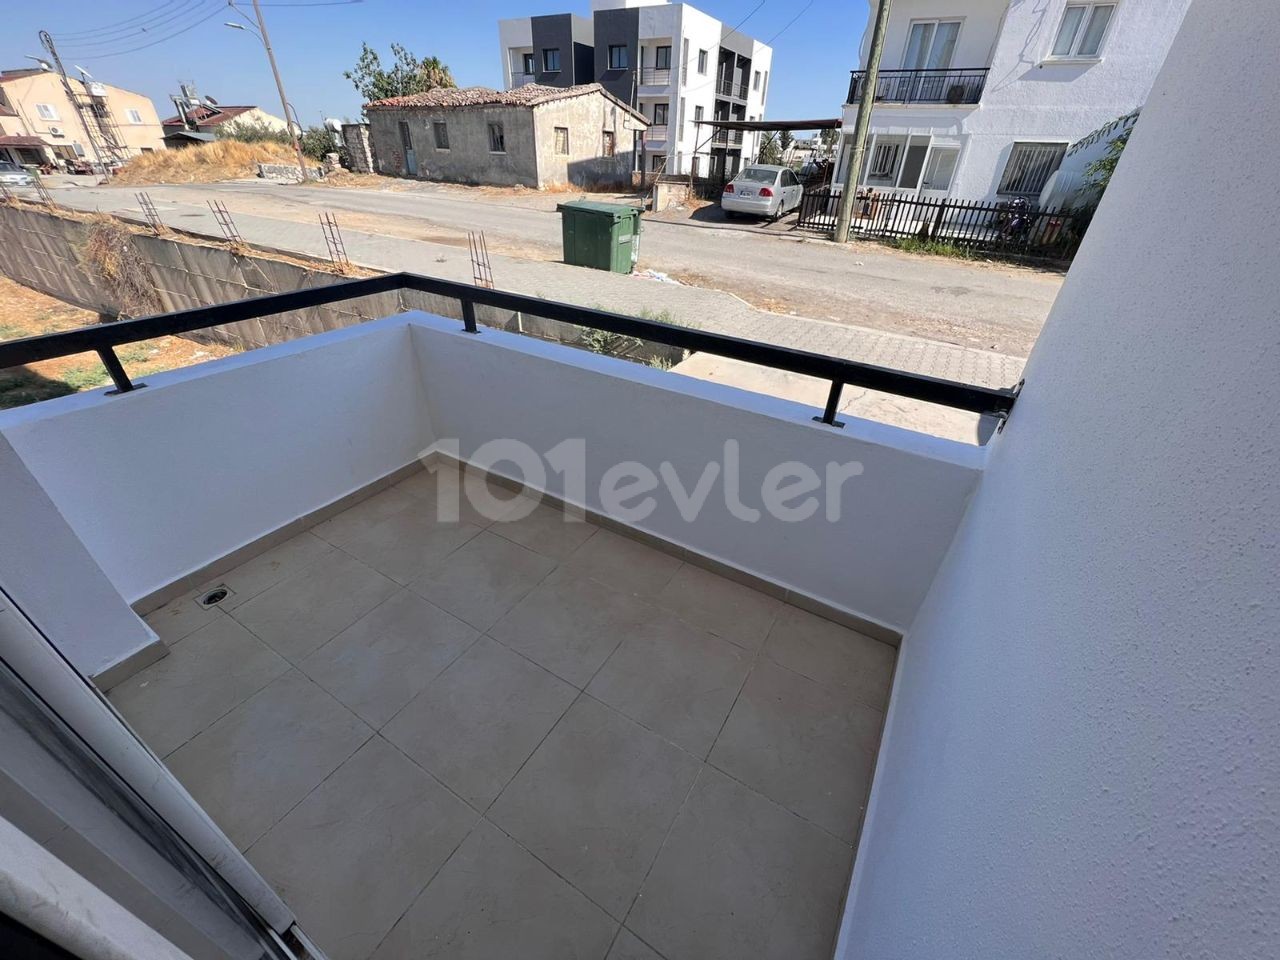 Ground Floor 3 +1 Apartment without Furniture for Rent in Hamitkoy District of Nicosia ** 